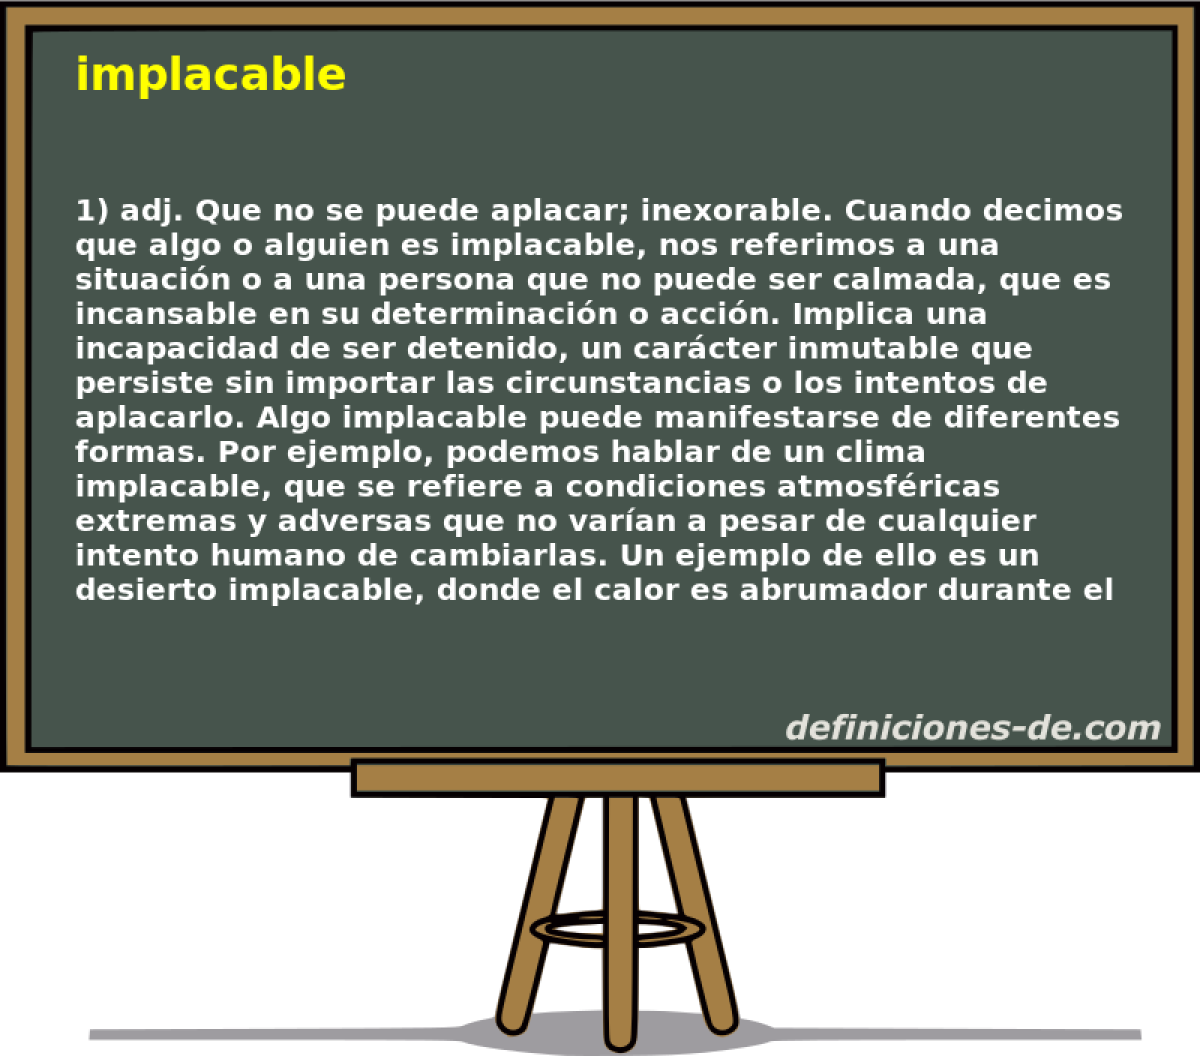 implacable 